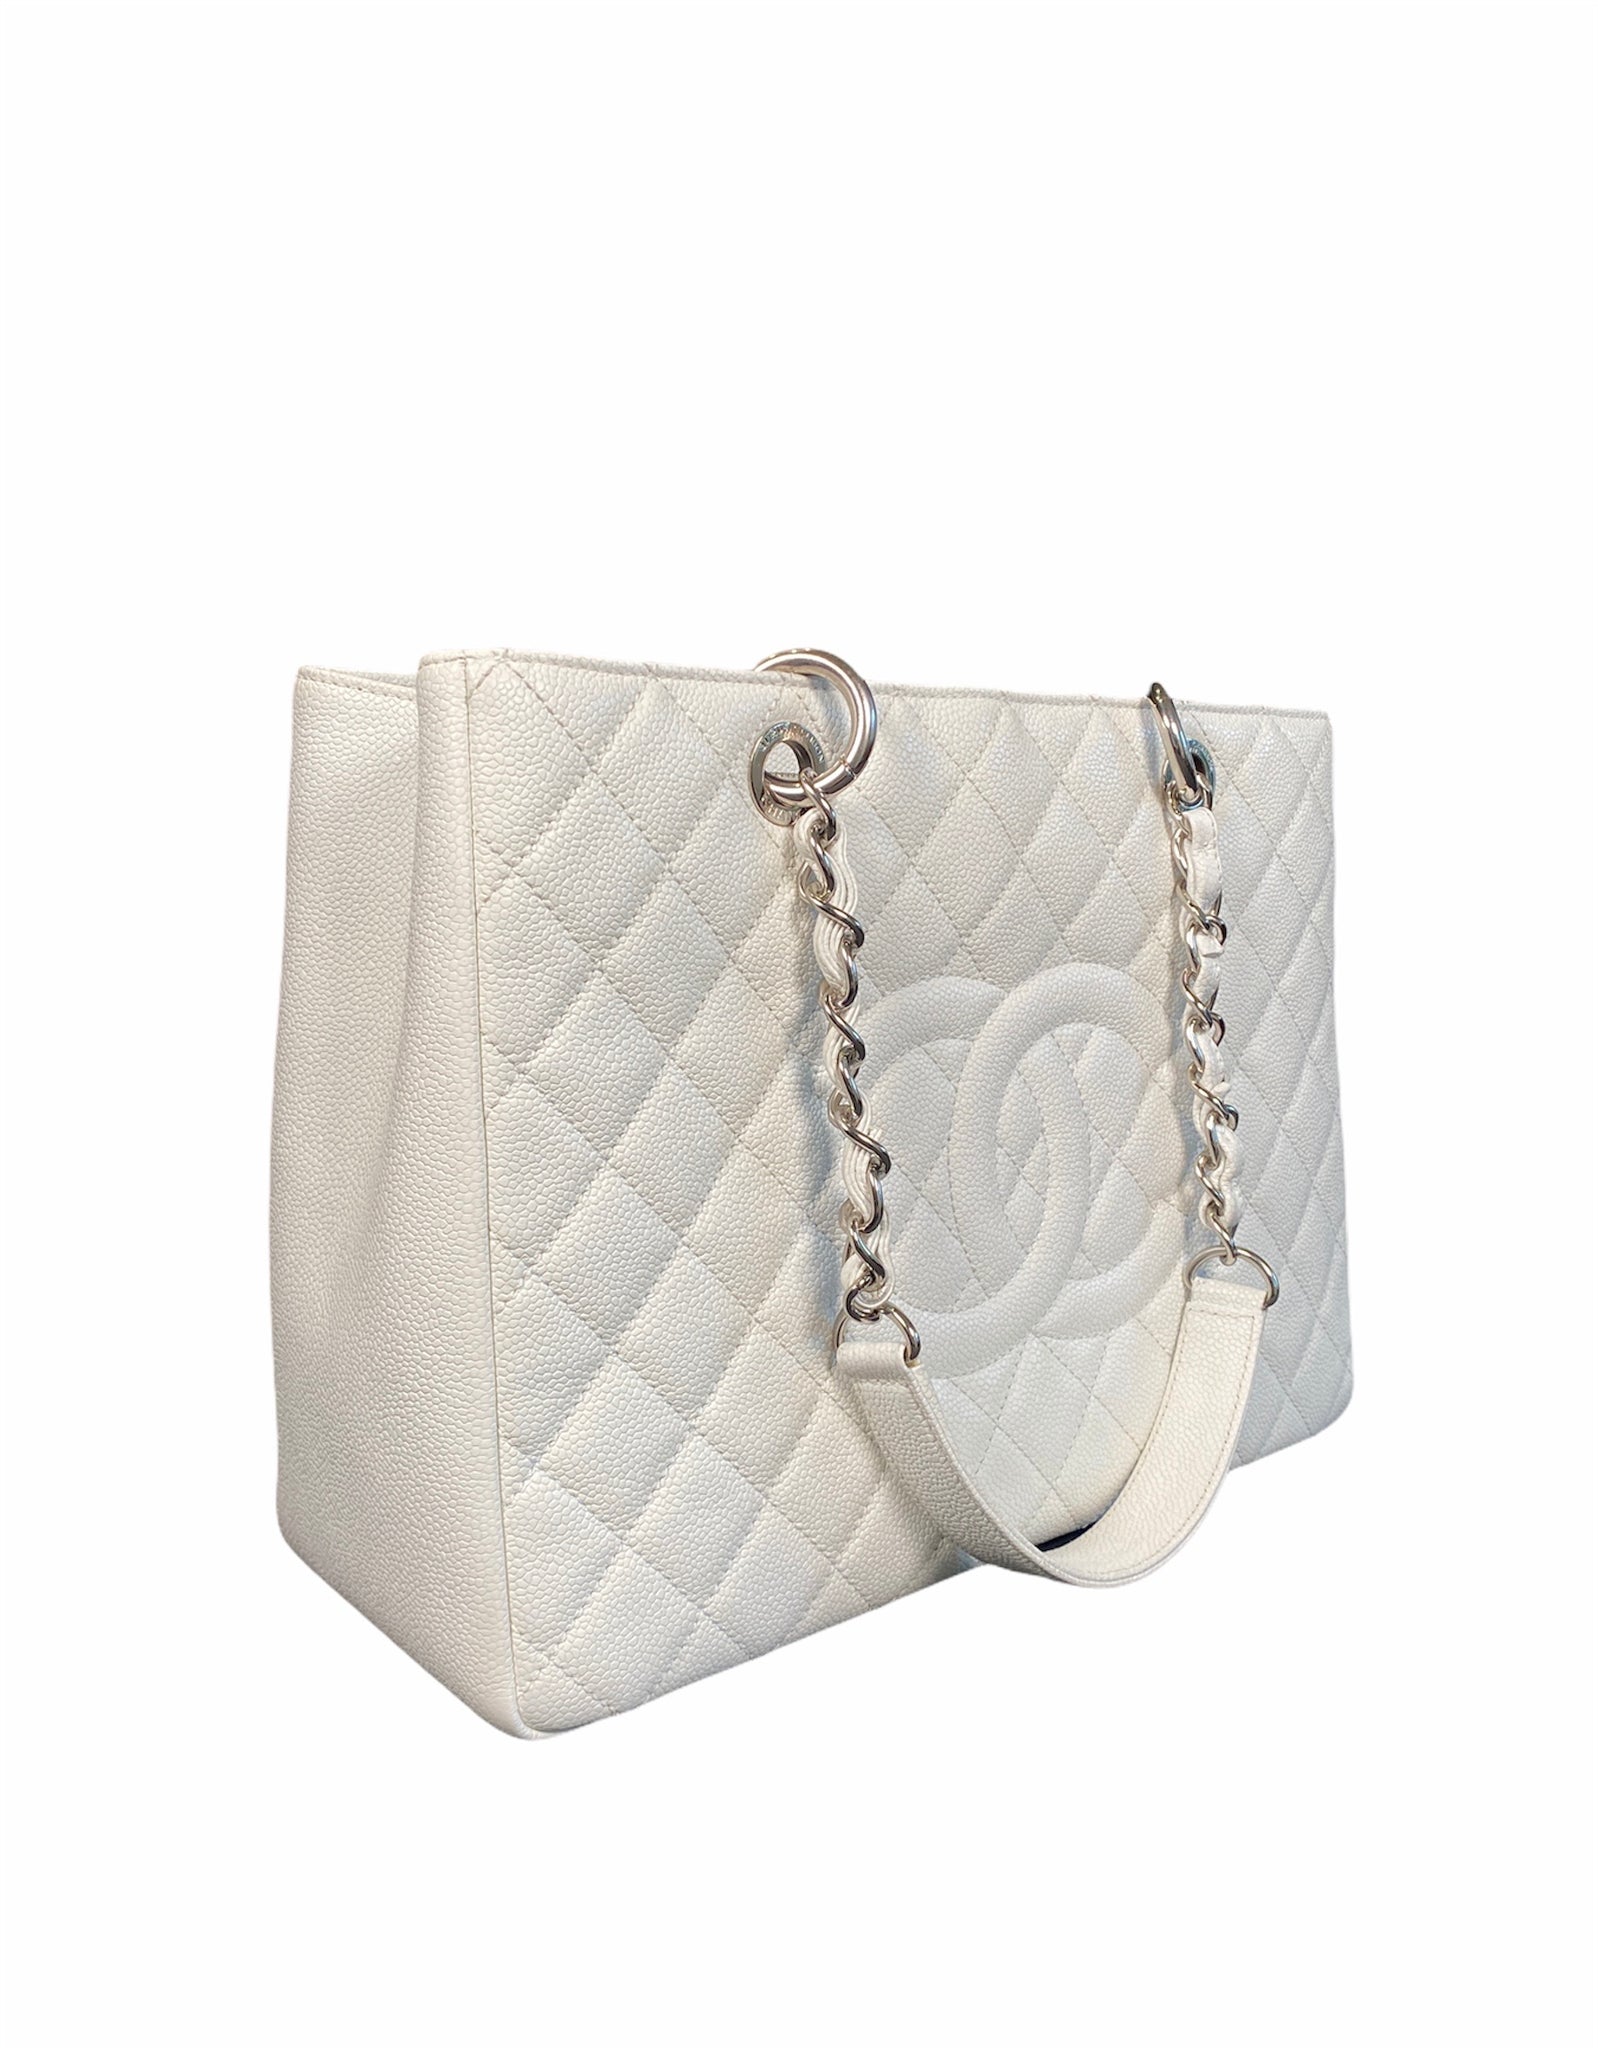 Chanel White Caviar Leather Quilted Grand Shopper Tote GST Bag For